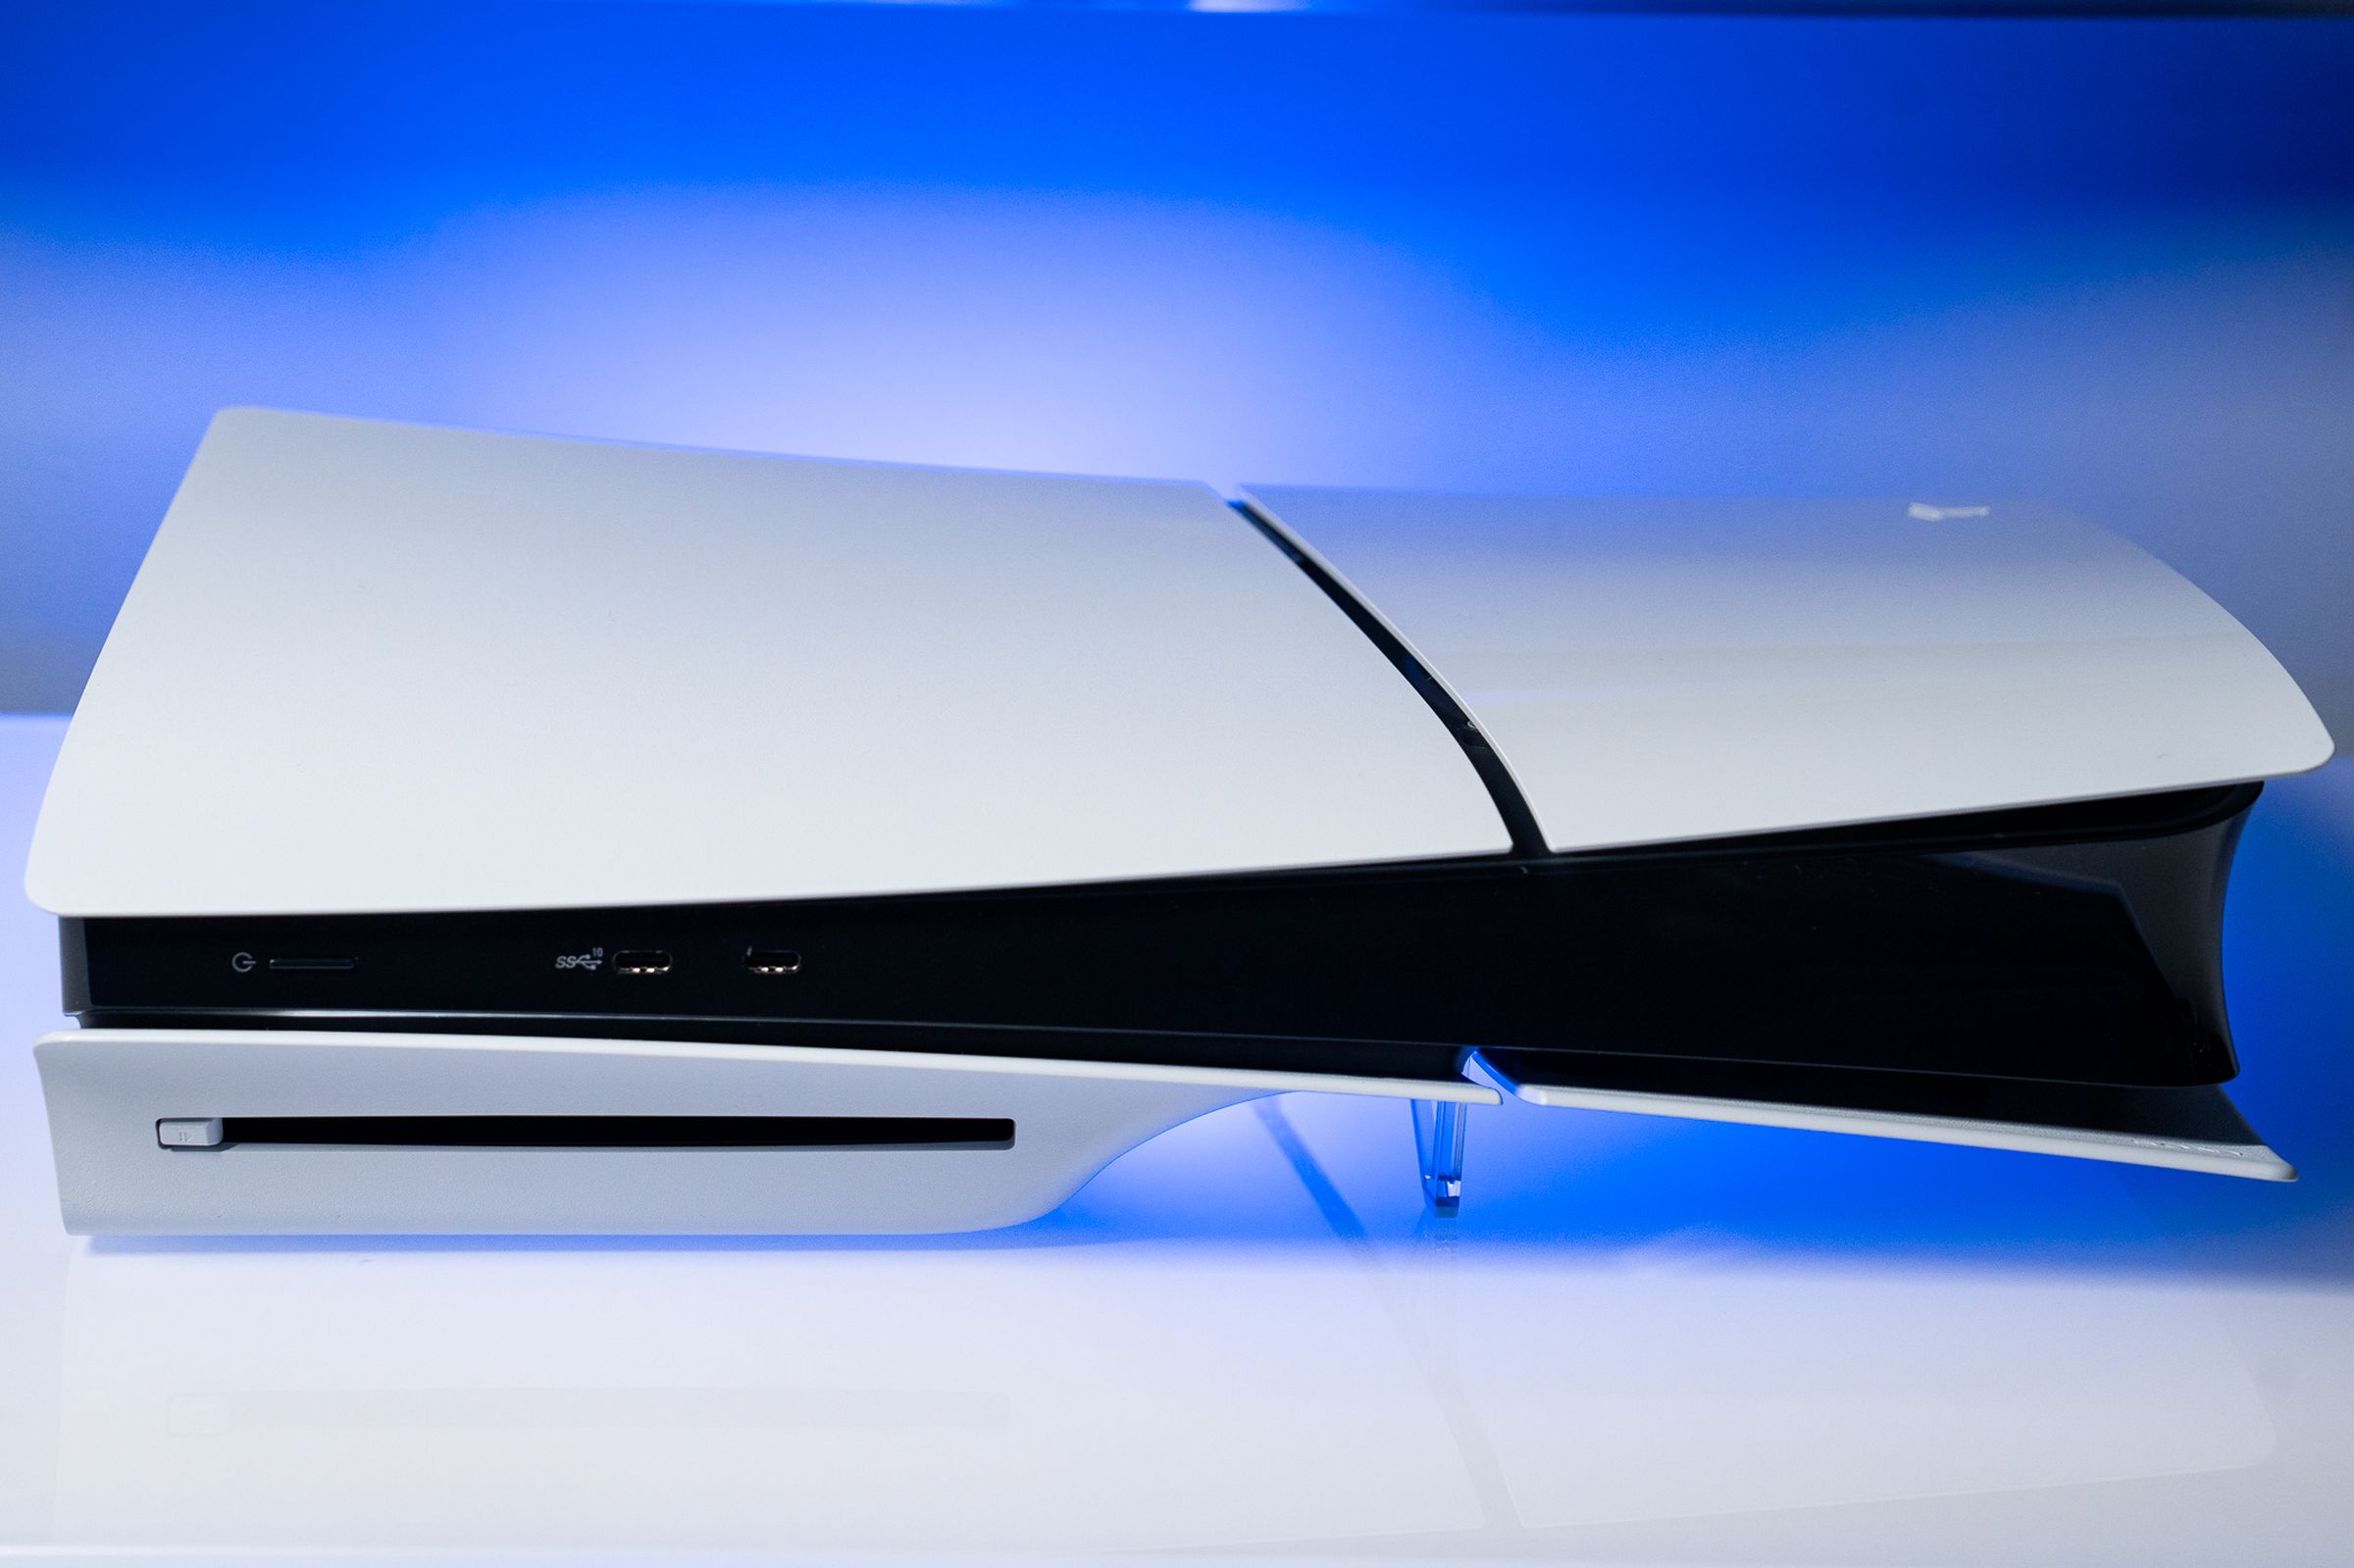 The PlayStation 5 slim sitting on a white surface with a blue backlight.